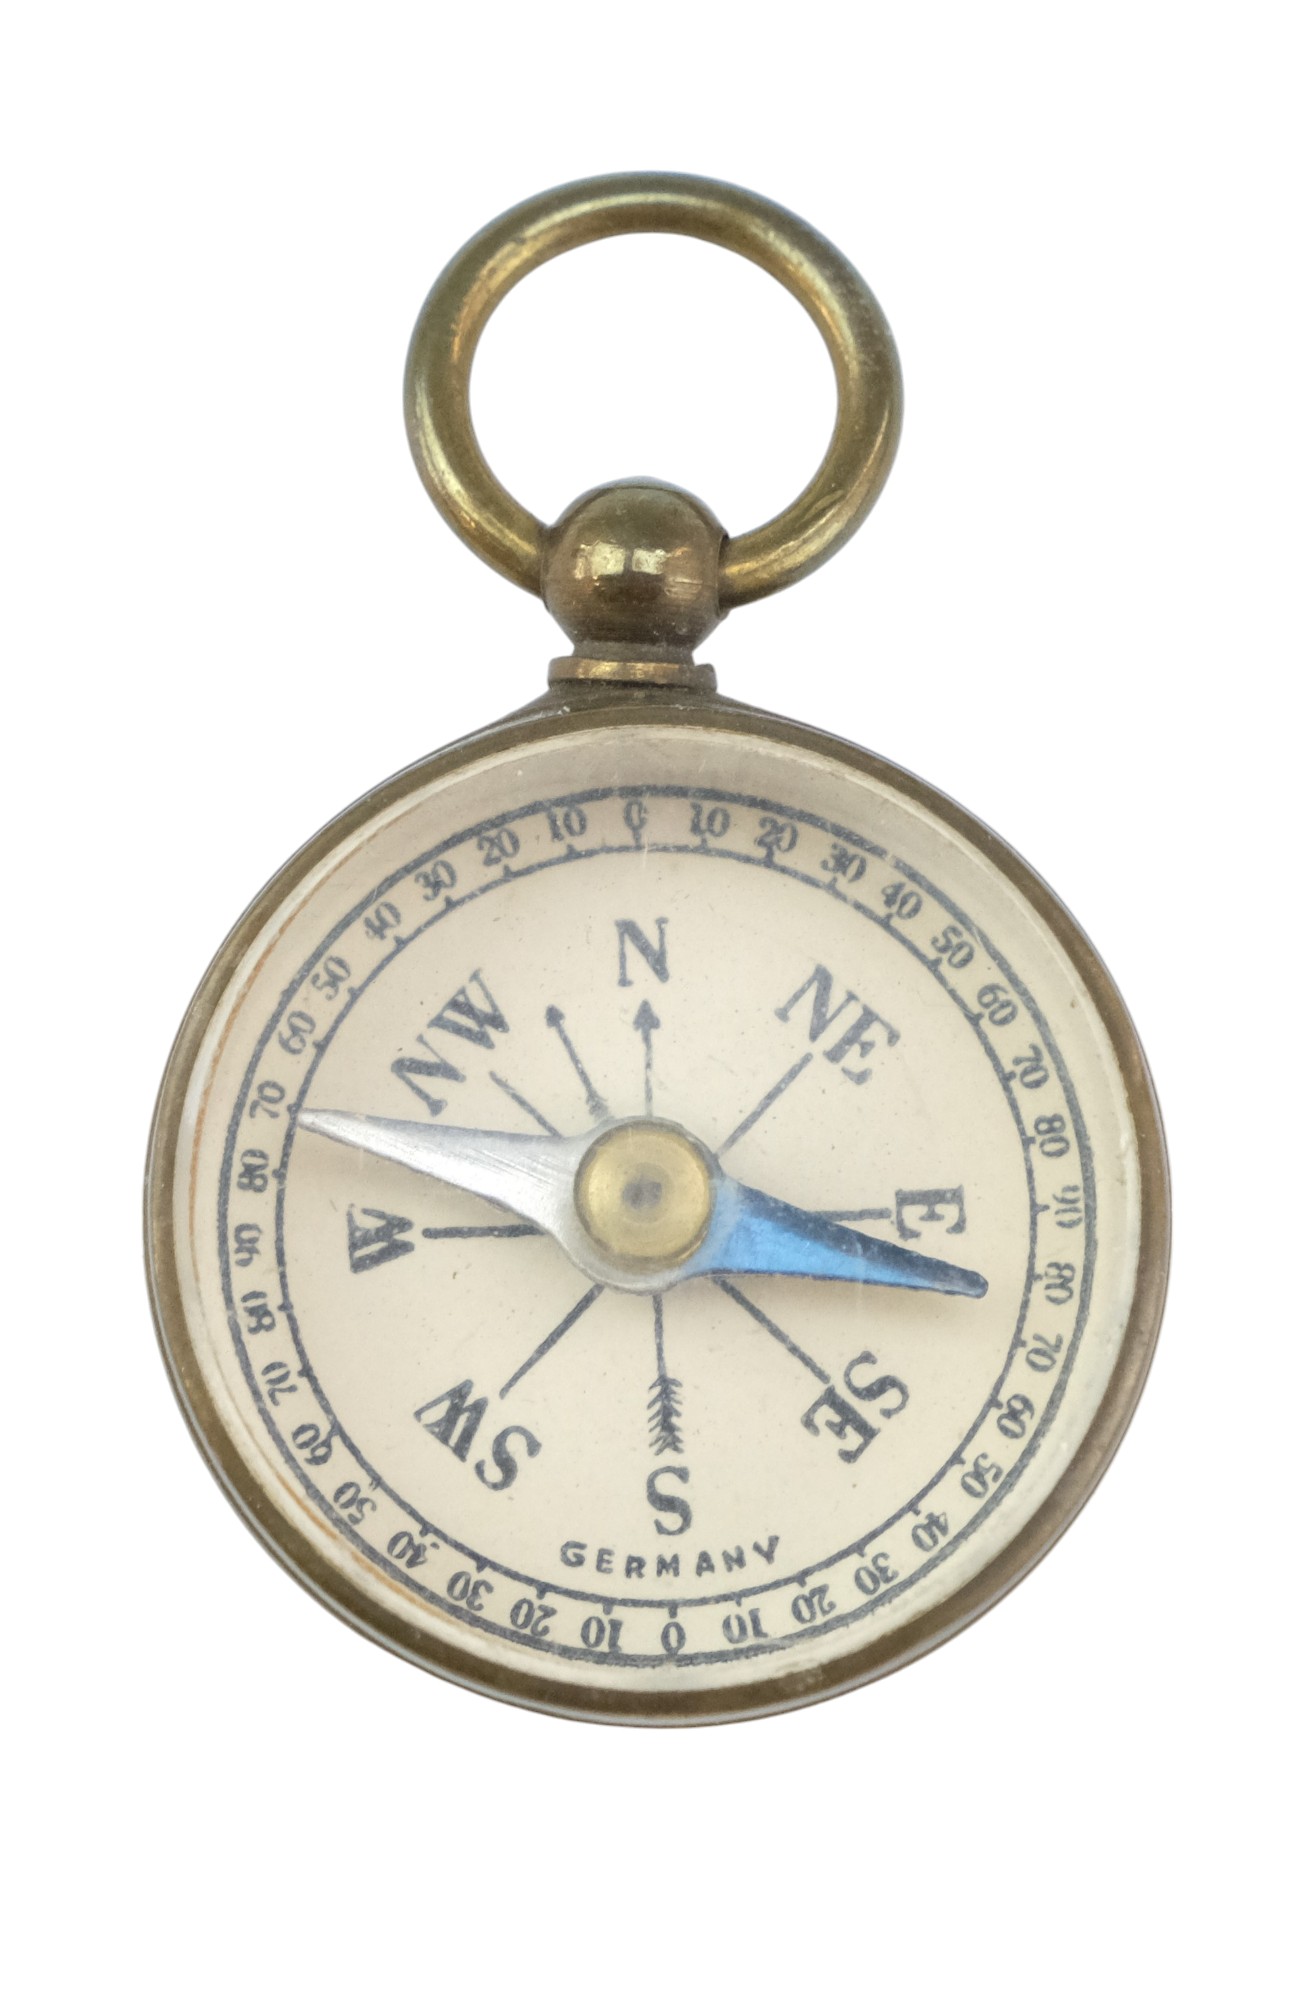 A 1924 Wembley British Empire Exhibition Nomori charm together with a miniature magnetic compass, - Image 3 of 3